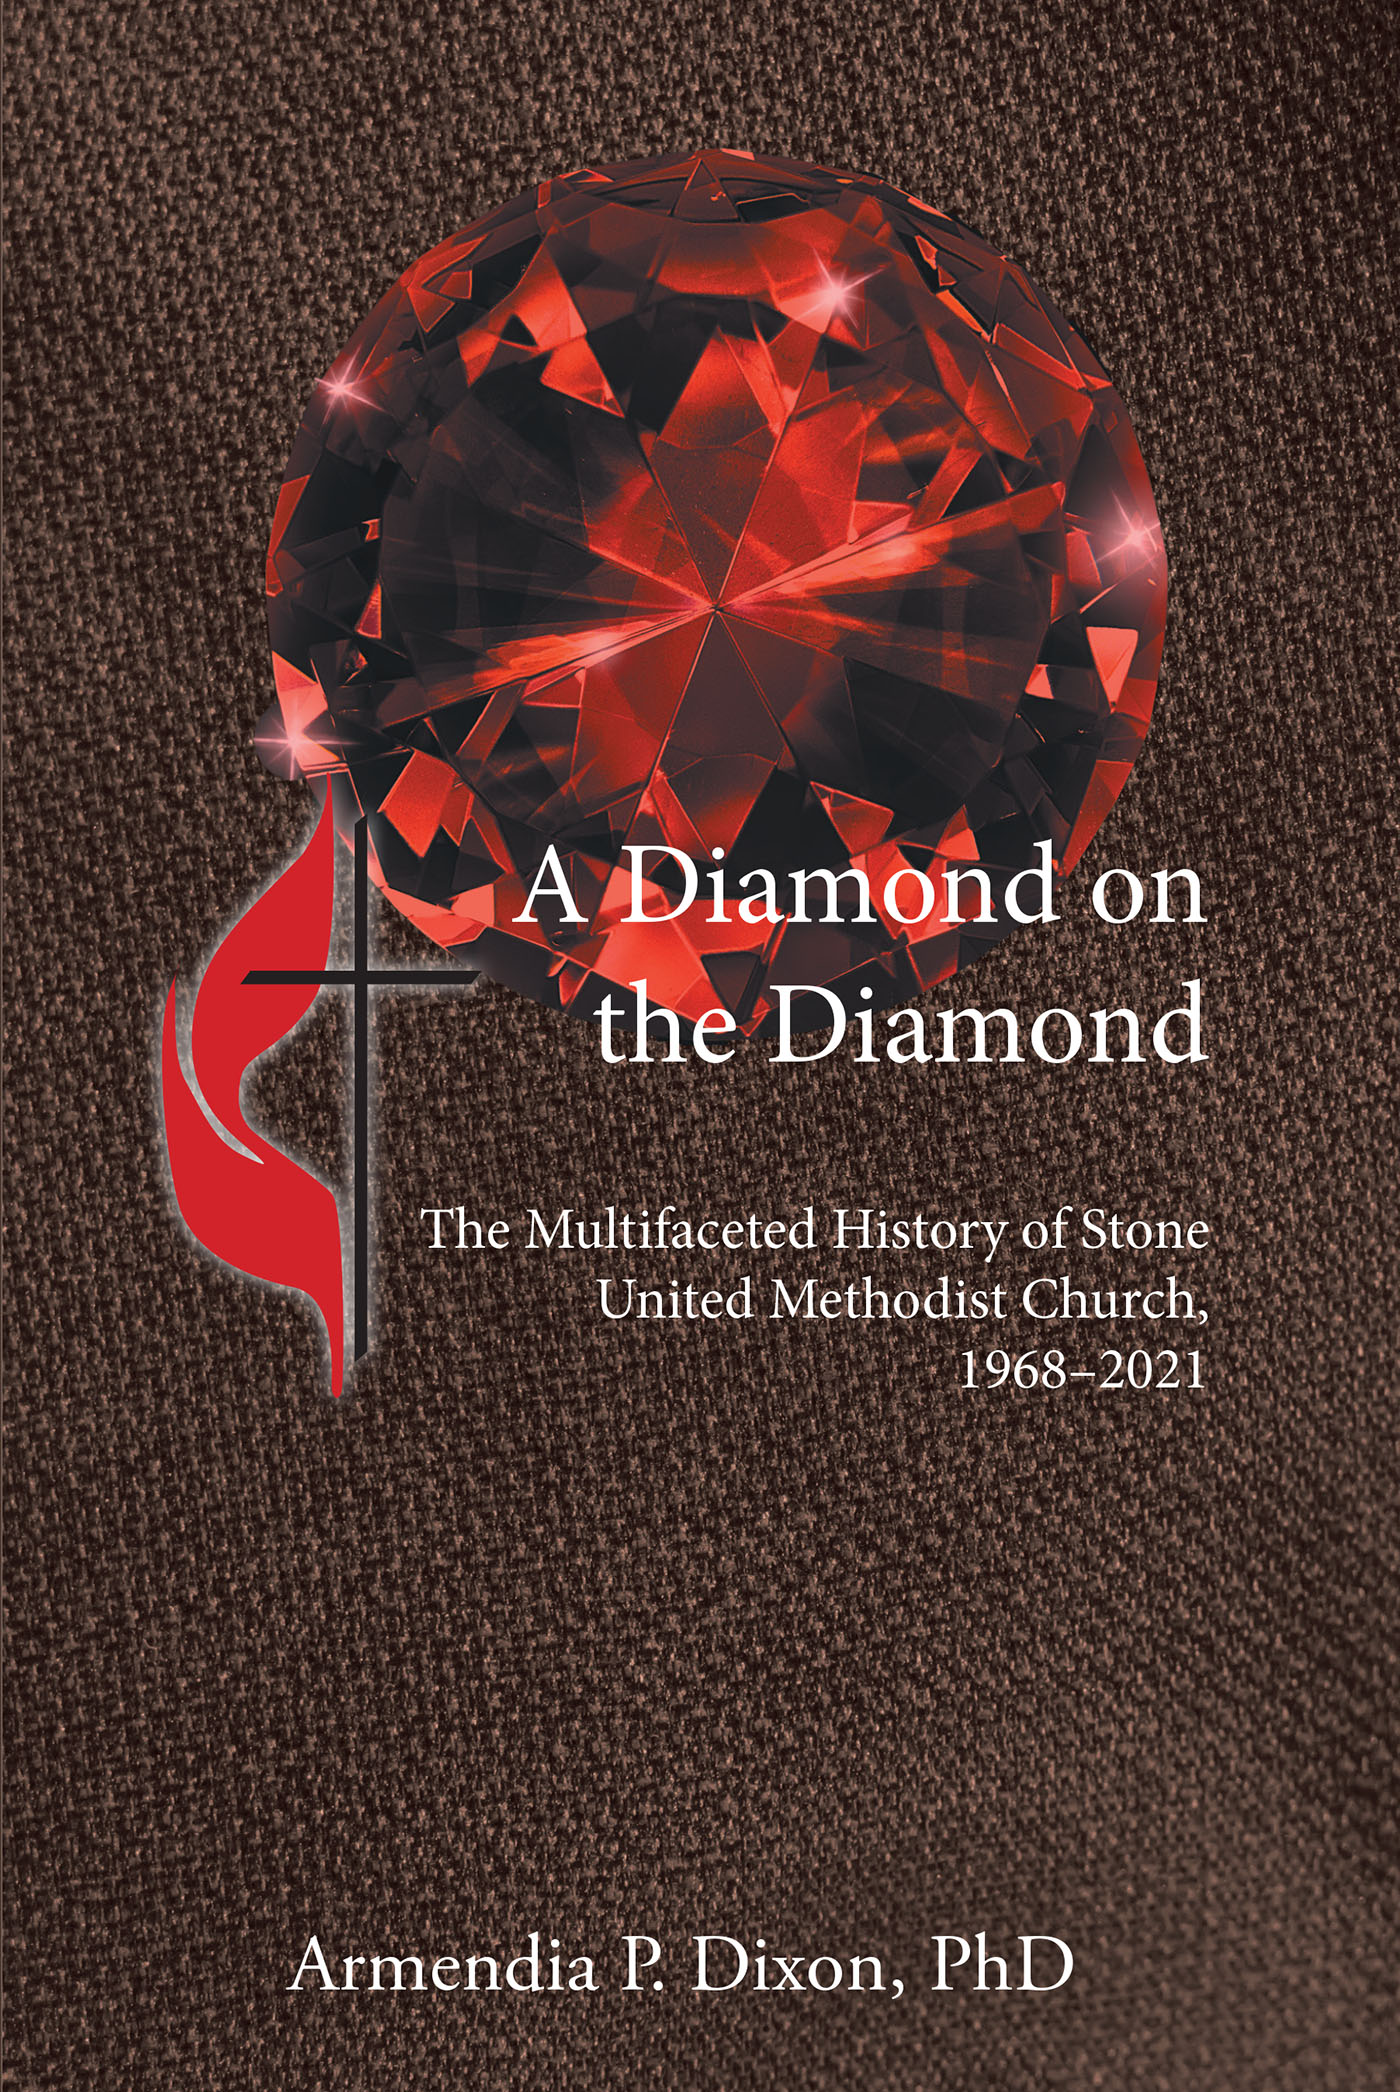 Armendia P. Dixon, PhD’s Newly Released “A Diamond on the Diamond: The Multifaceted History of Stone United Methodist Church, 1968–2021” is an Engaging History